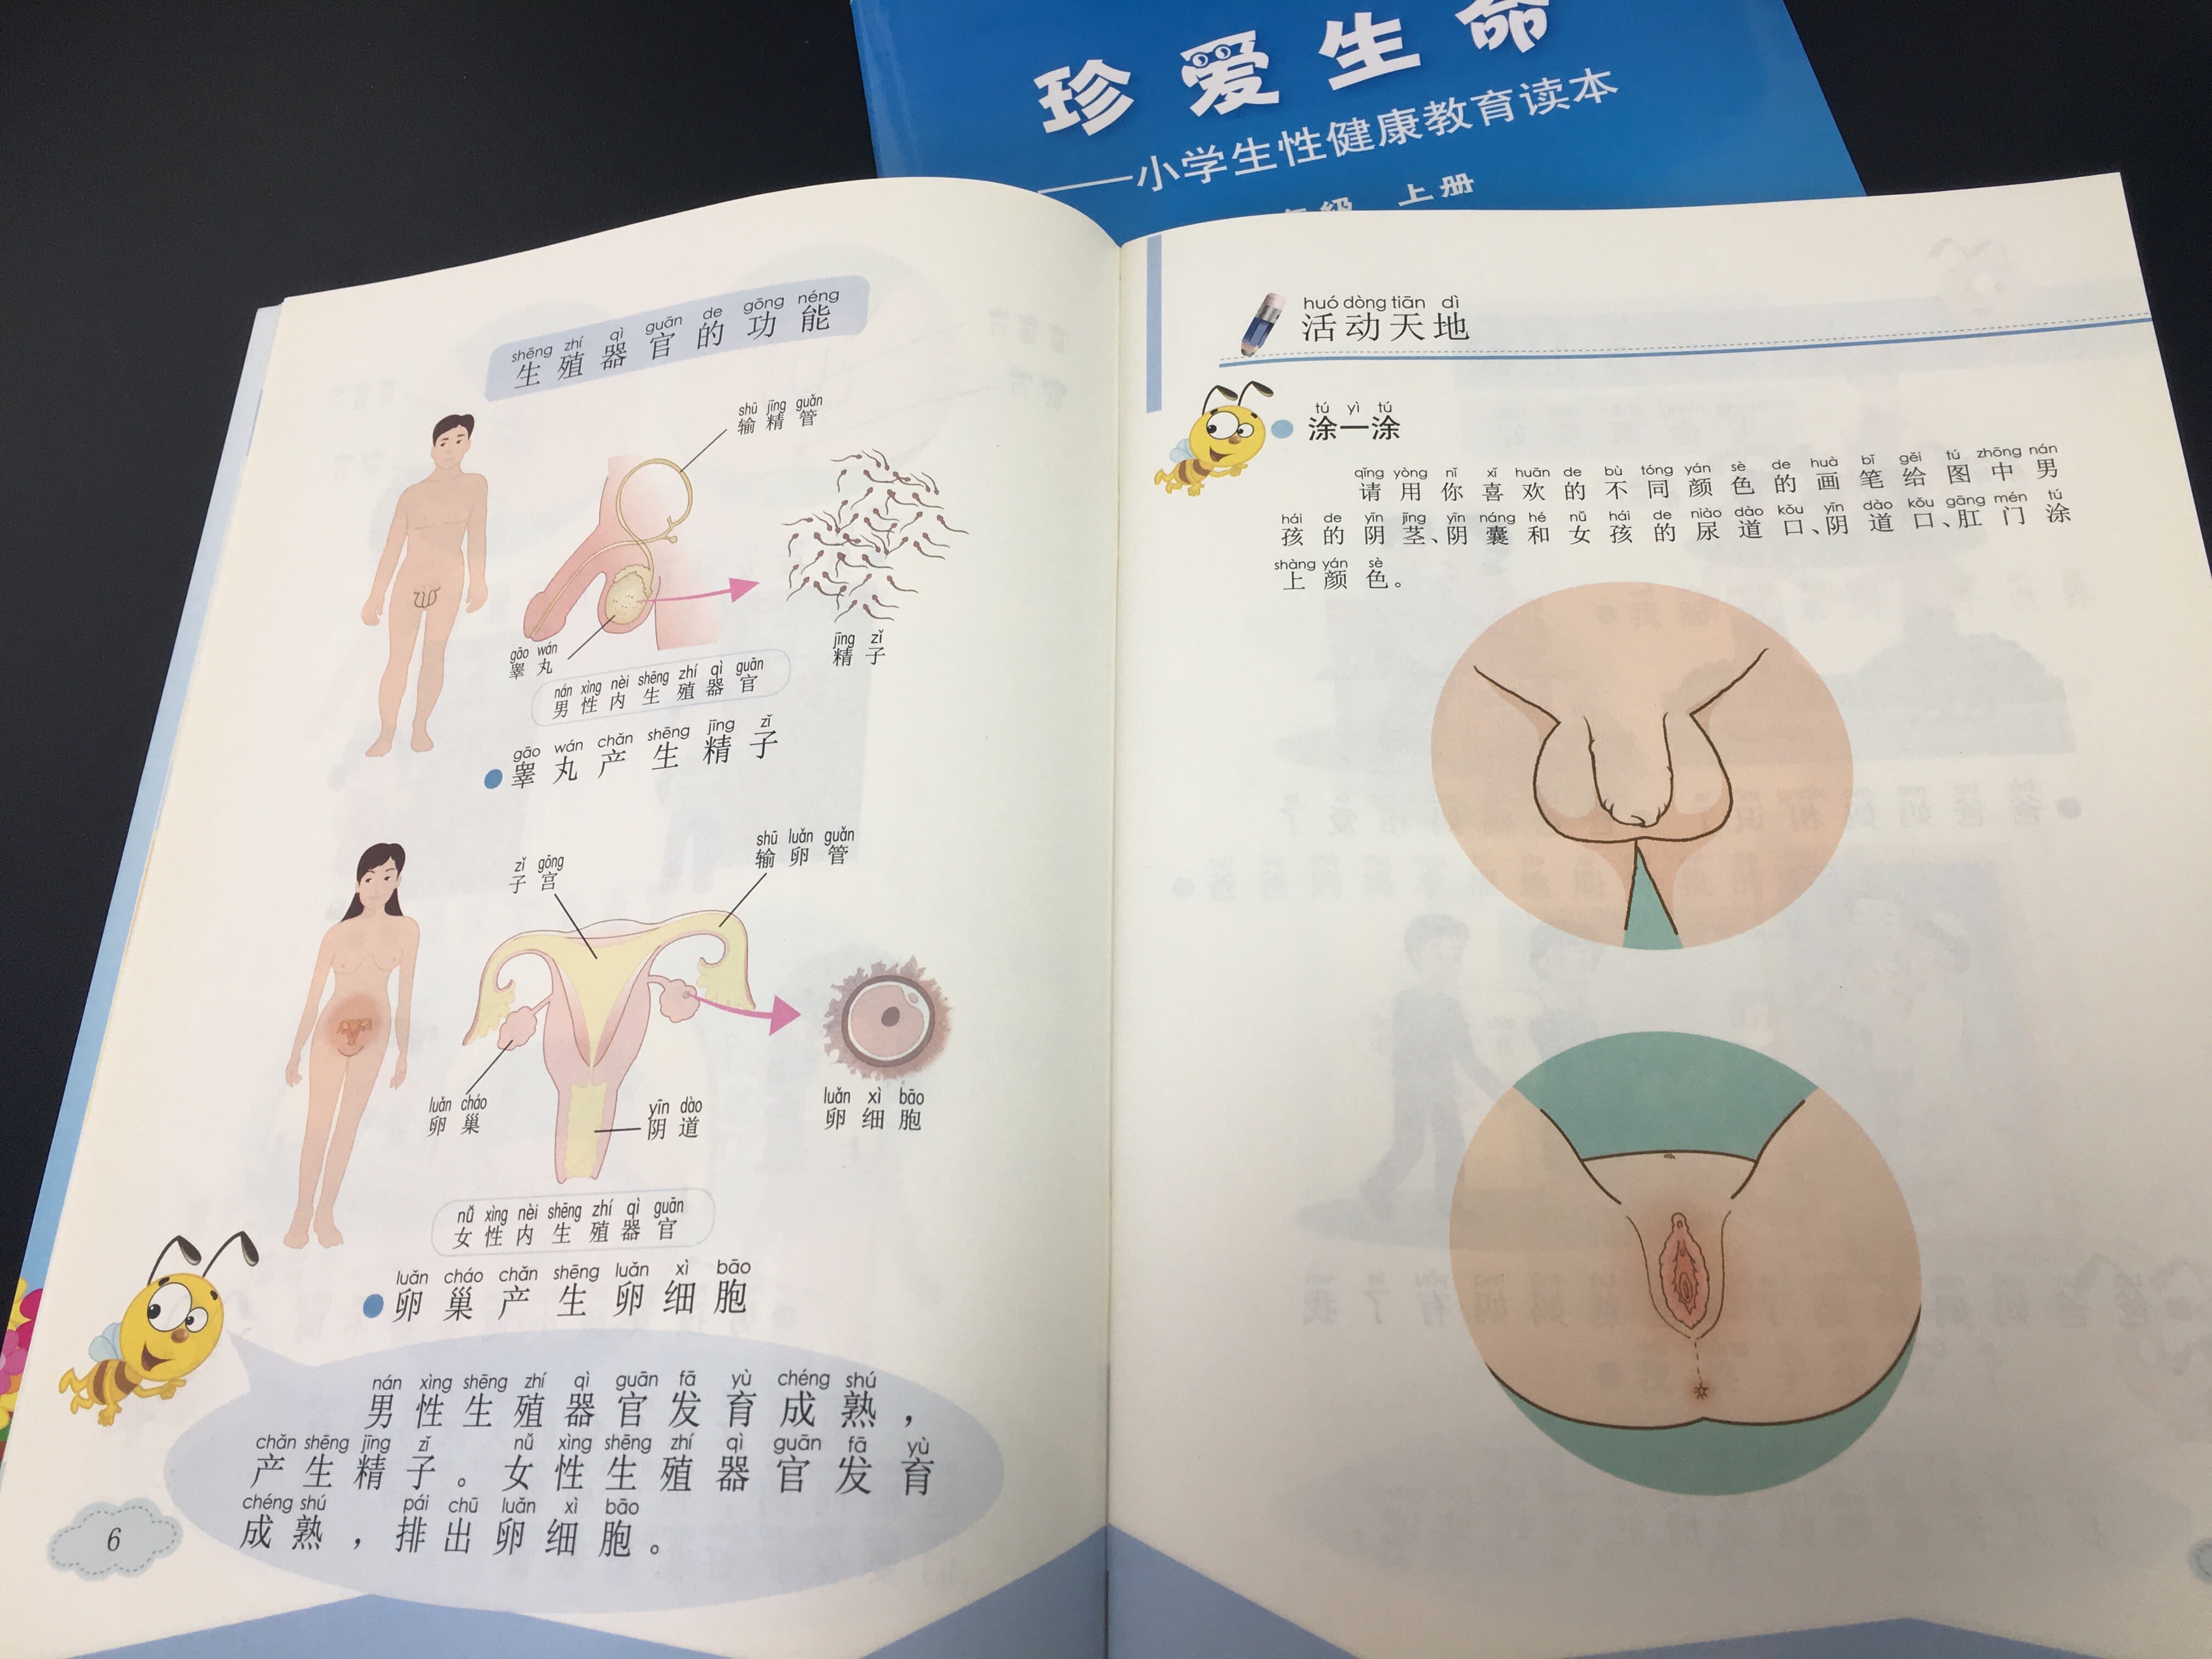 Porn Sex School - Shock and praise for groundbreaking sex-ed textbook in China | CNN